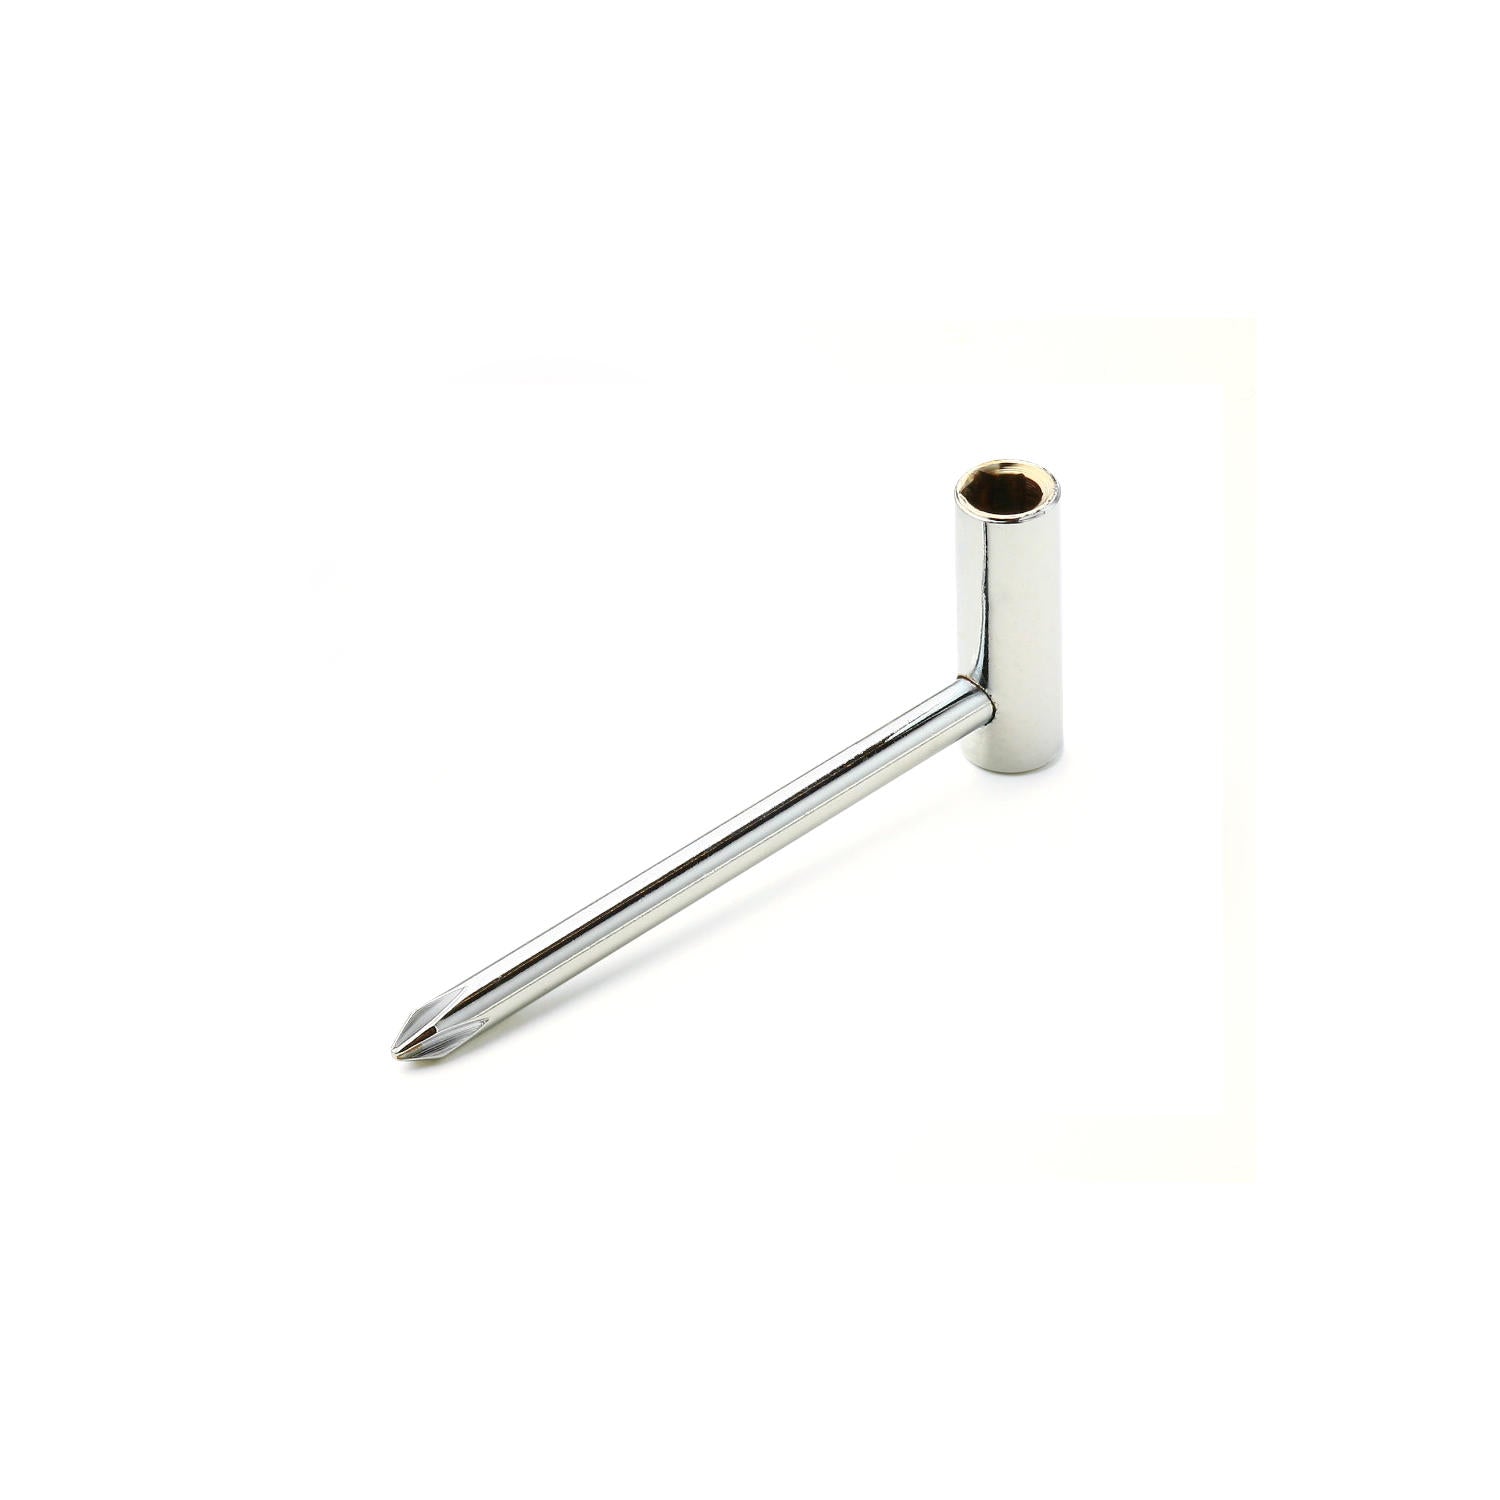 Taylor Truss Rod Wrench